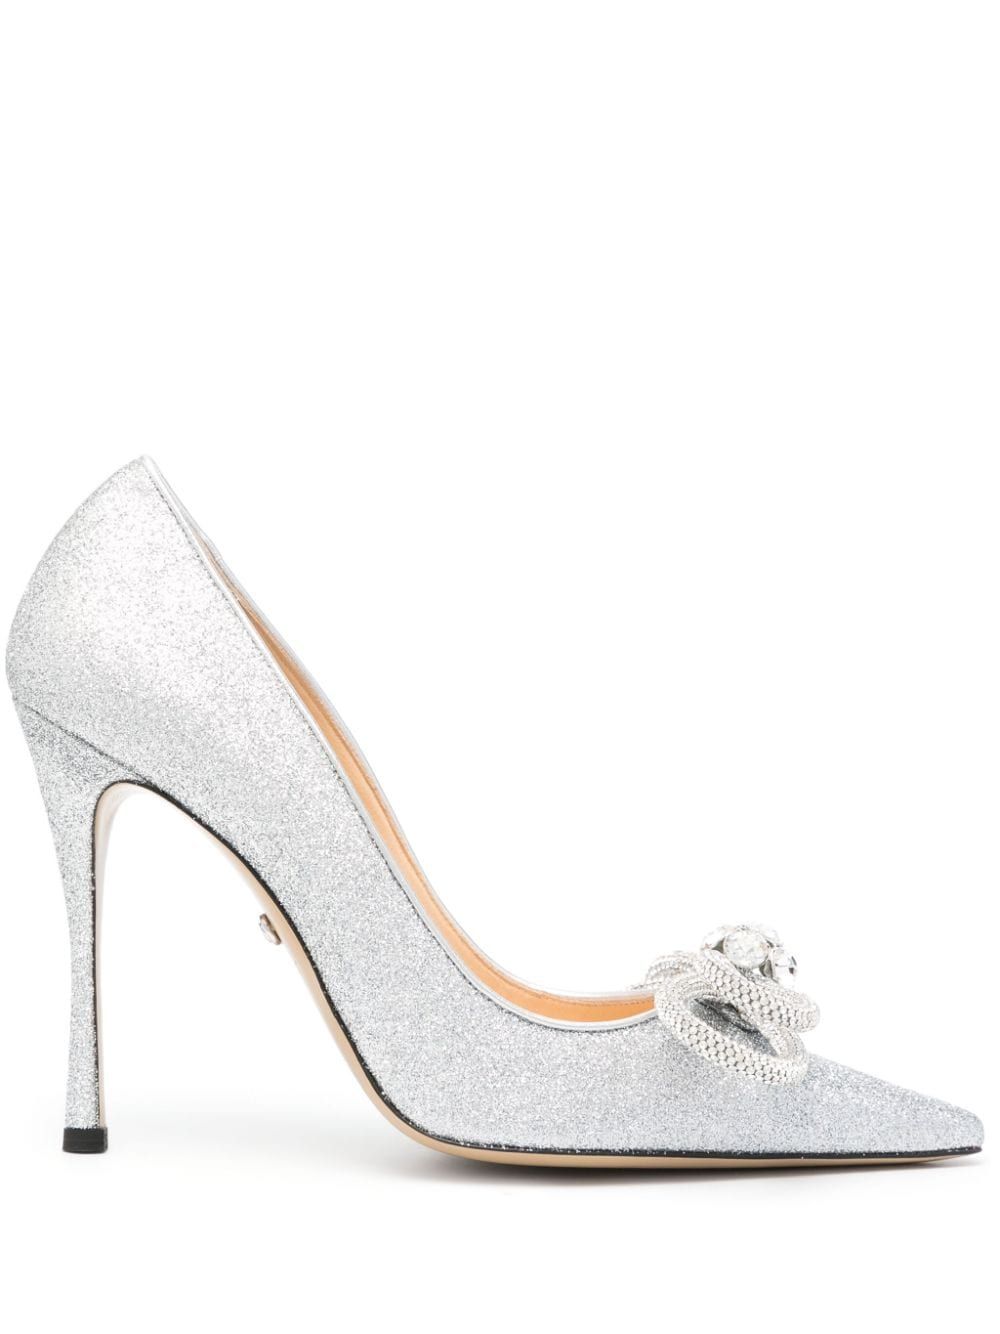 Double Bow glittered pumps | Farfetch Global